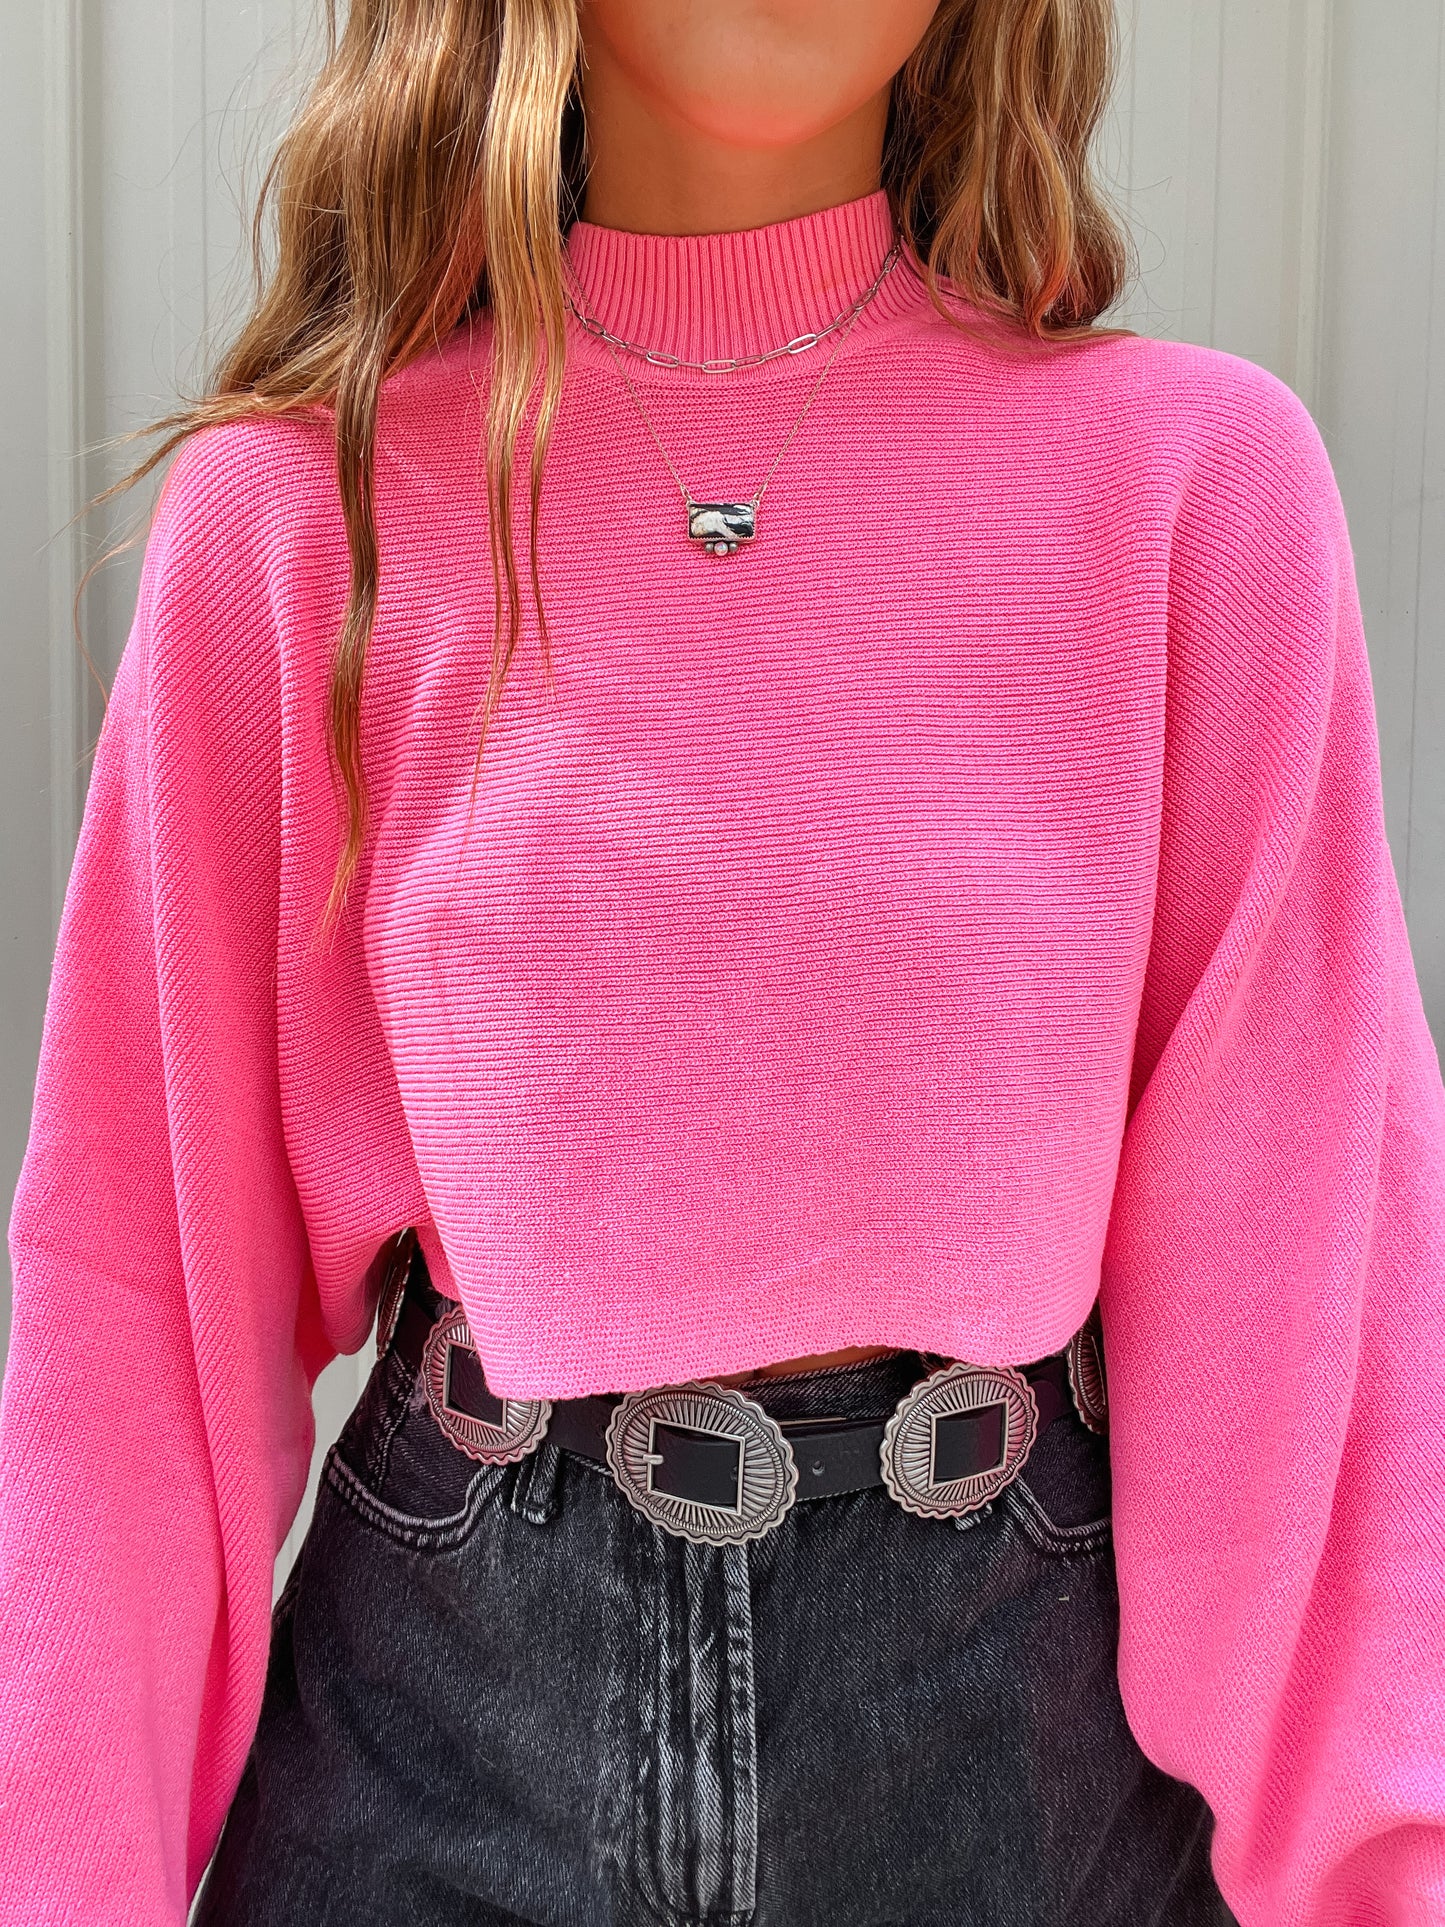 The Lover Girl Sweater Top